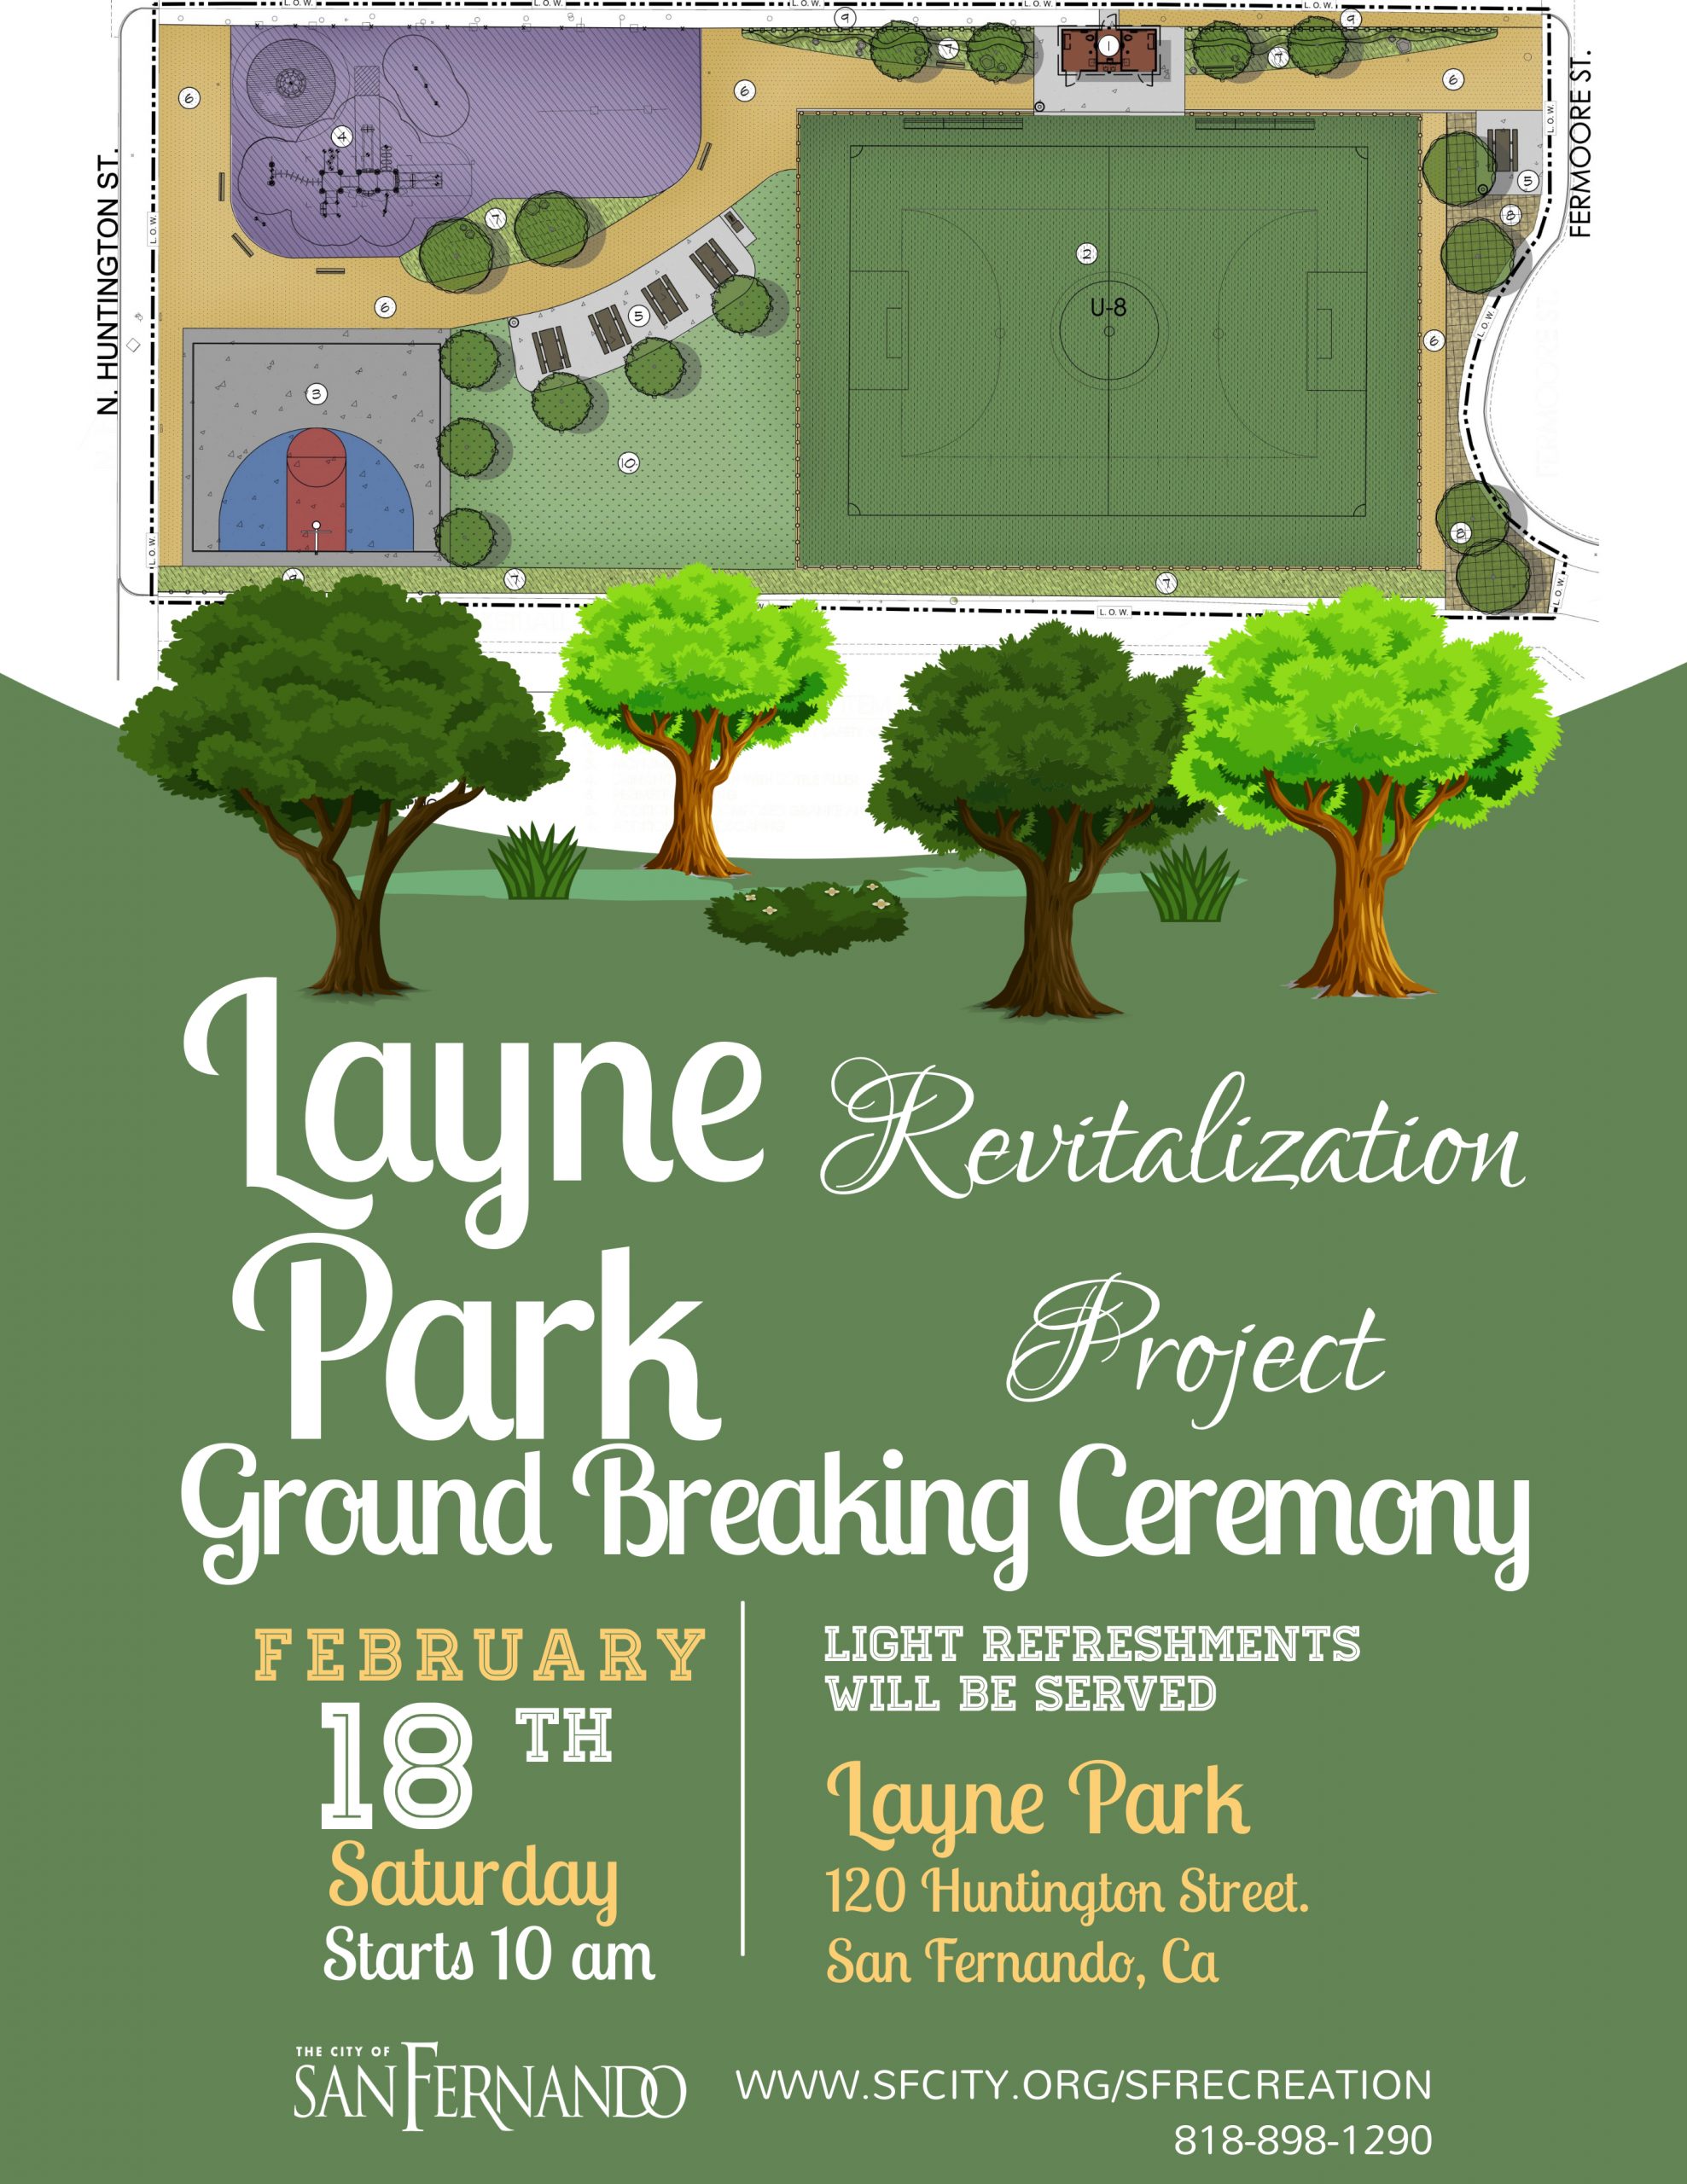 Layne Park Revitalization Project Ground Breaking (2-18-23)